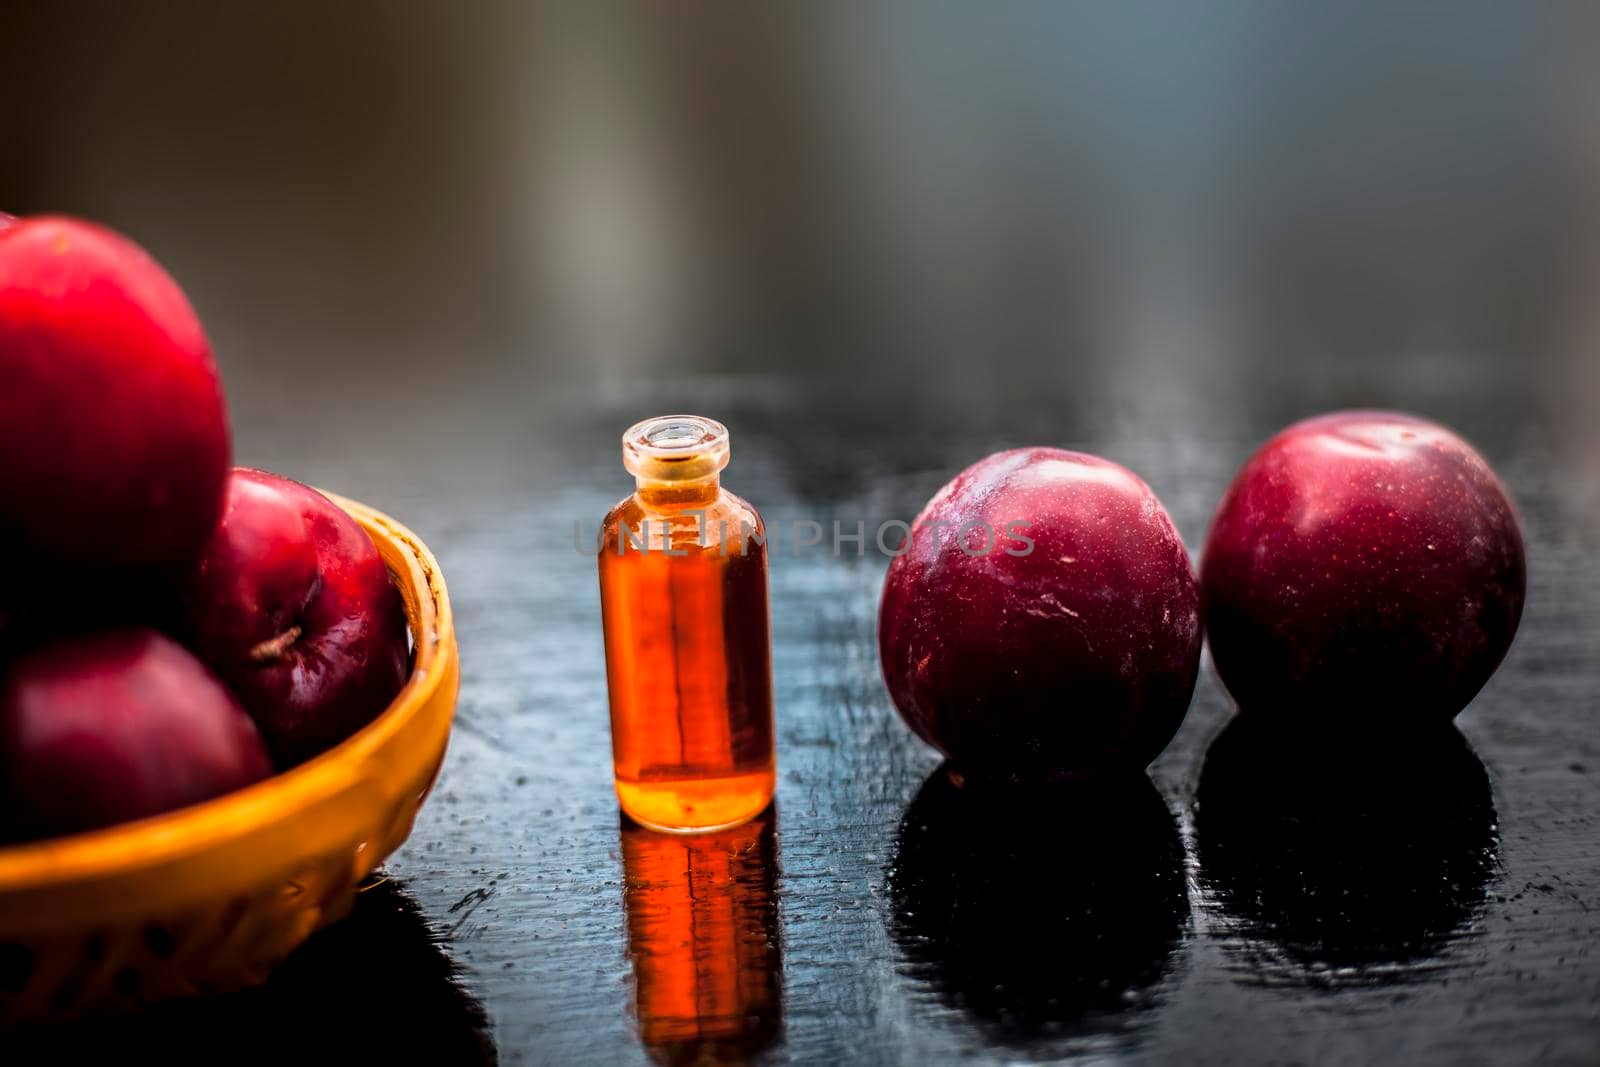 Raw ripe red plums along with its extracted essential concentration or essence in a glass bottle on a wooden surface.